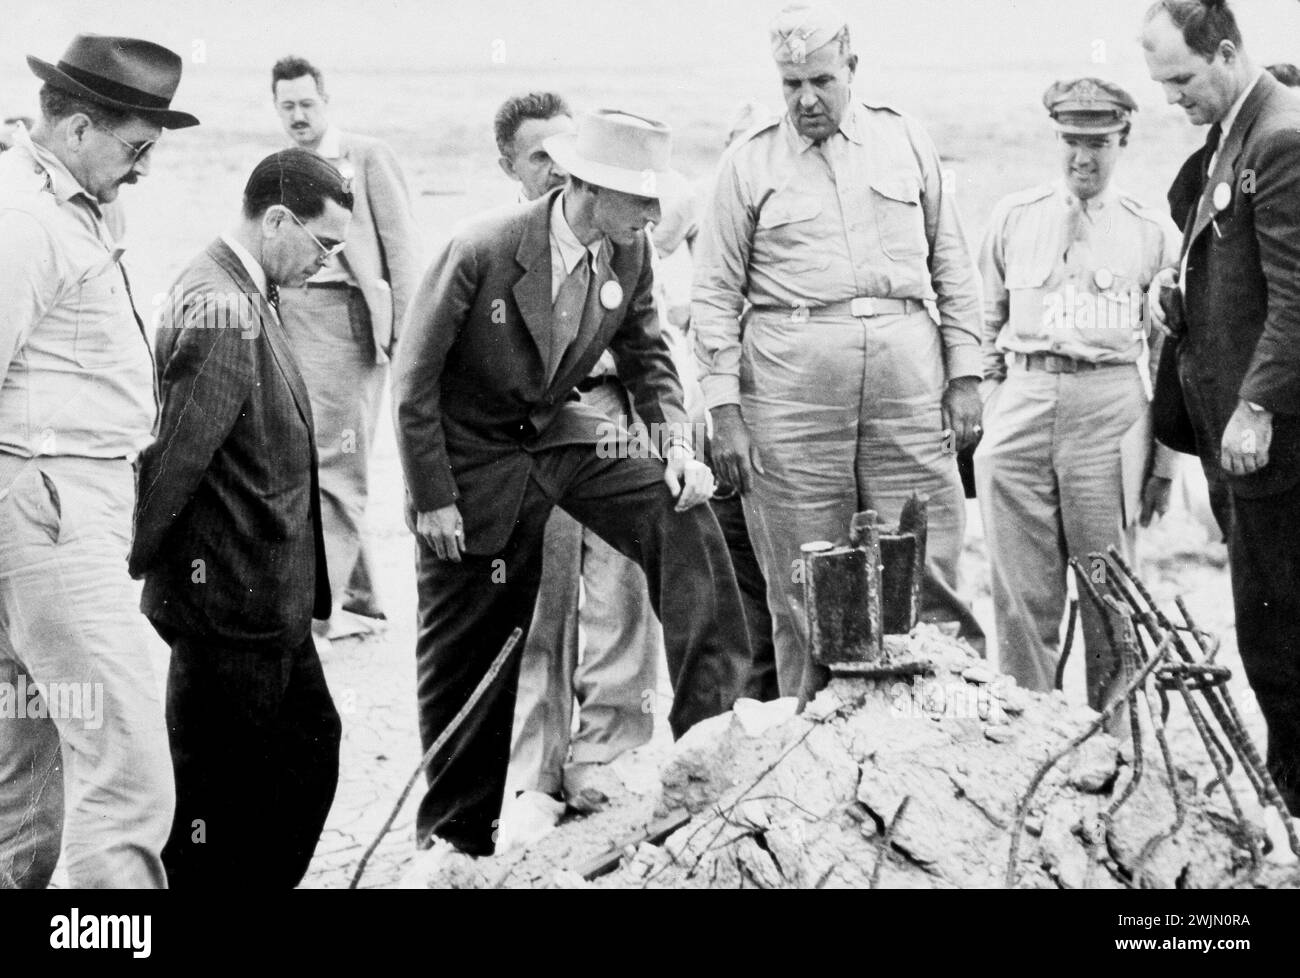 J. Robert Oppenheimer (in light colored hat), General Leslie Groves (large man in military dress to Oppenheimer's left), and others at the ground zero site of the Trinity test after the bombing of Hiroshima and Nagasaki, New Mexico 1945. Stock Photo